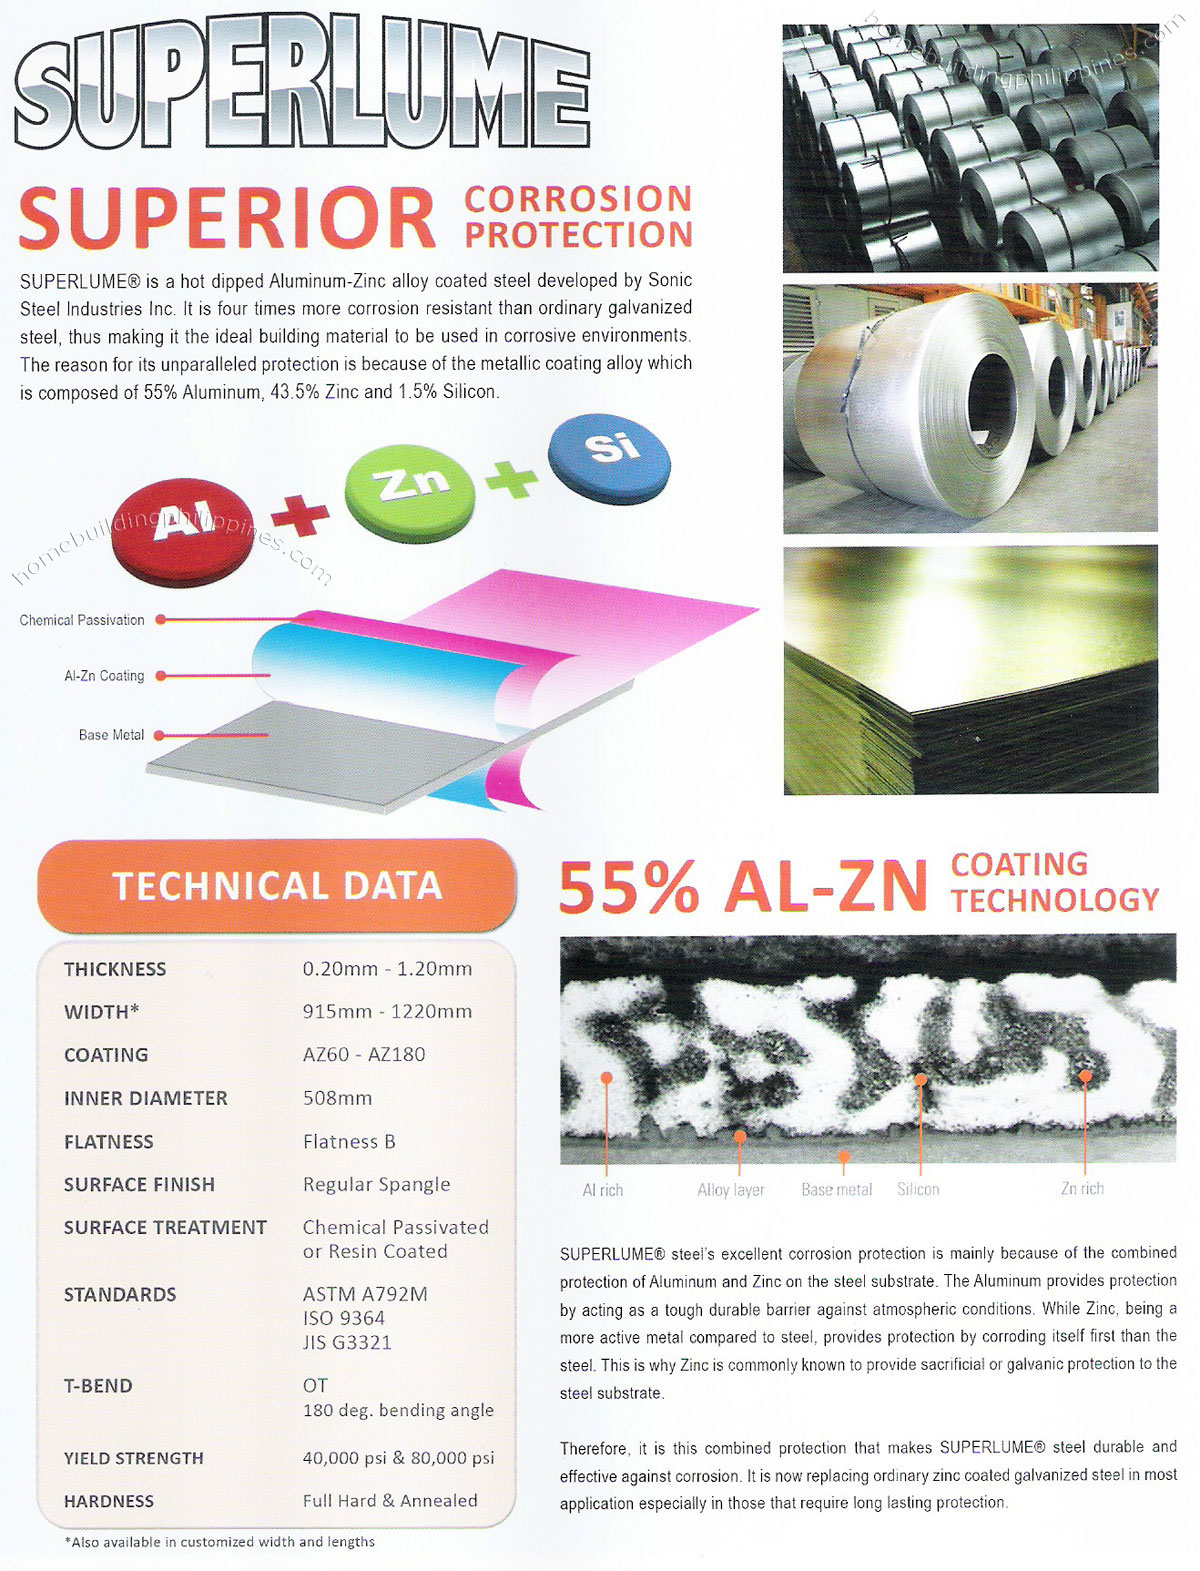 superlume steel roofing corrosion protection coating technology